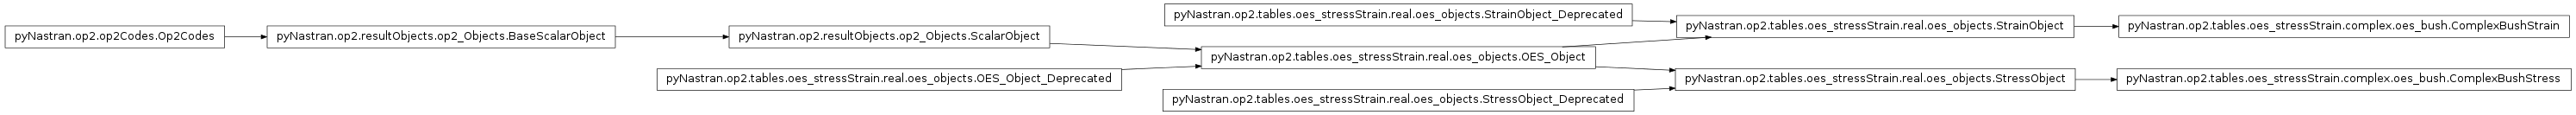 Inheritance diagram of pyNastran.op2.tables.oes_stressStrain.complex.oes_bush